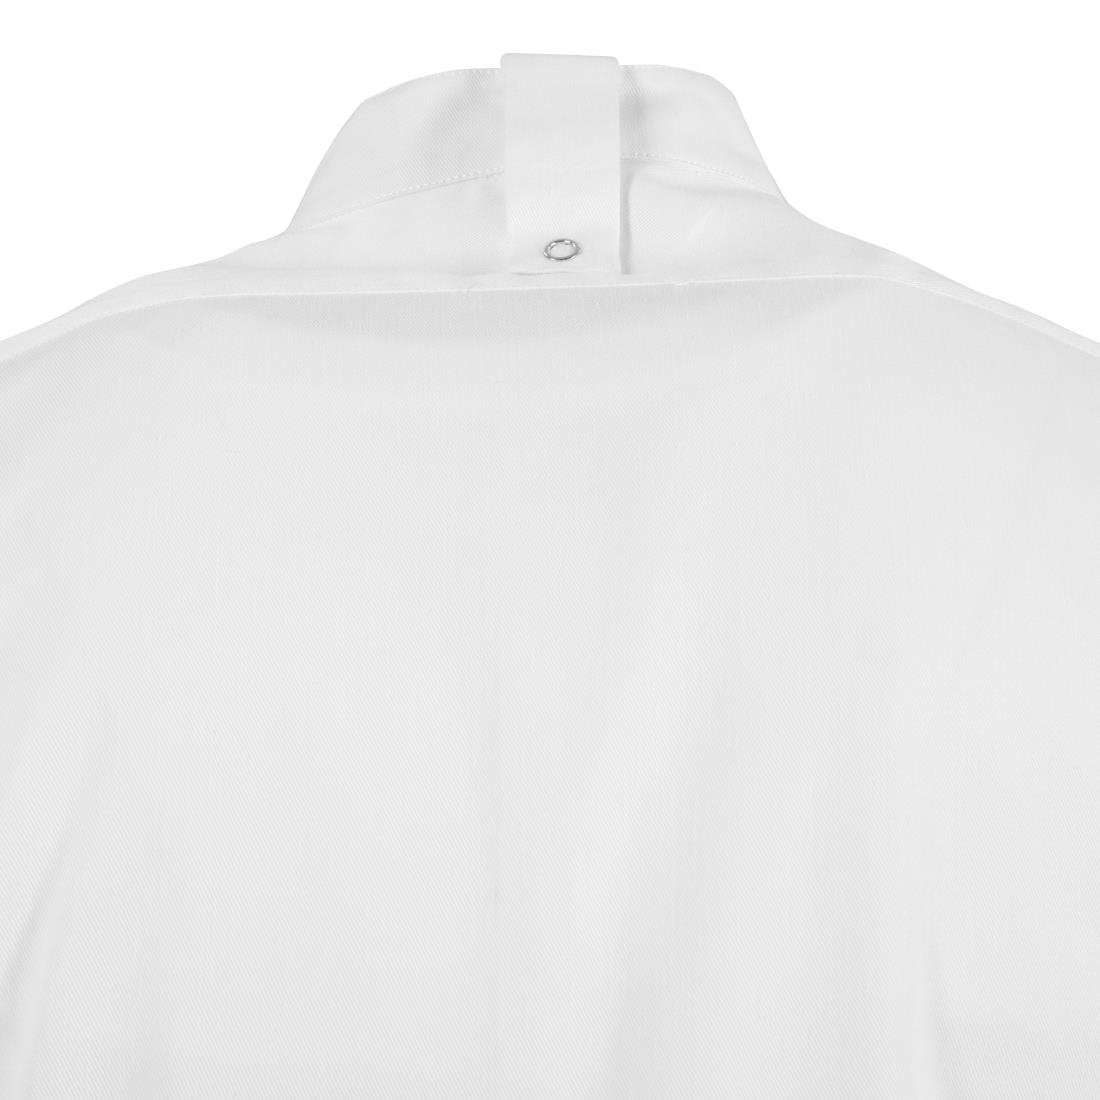 BB702-S Southside Band Collar Chefs Jacket White Size S JD Catering Equipment Solutions Ltd